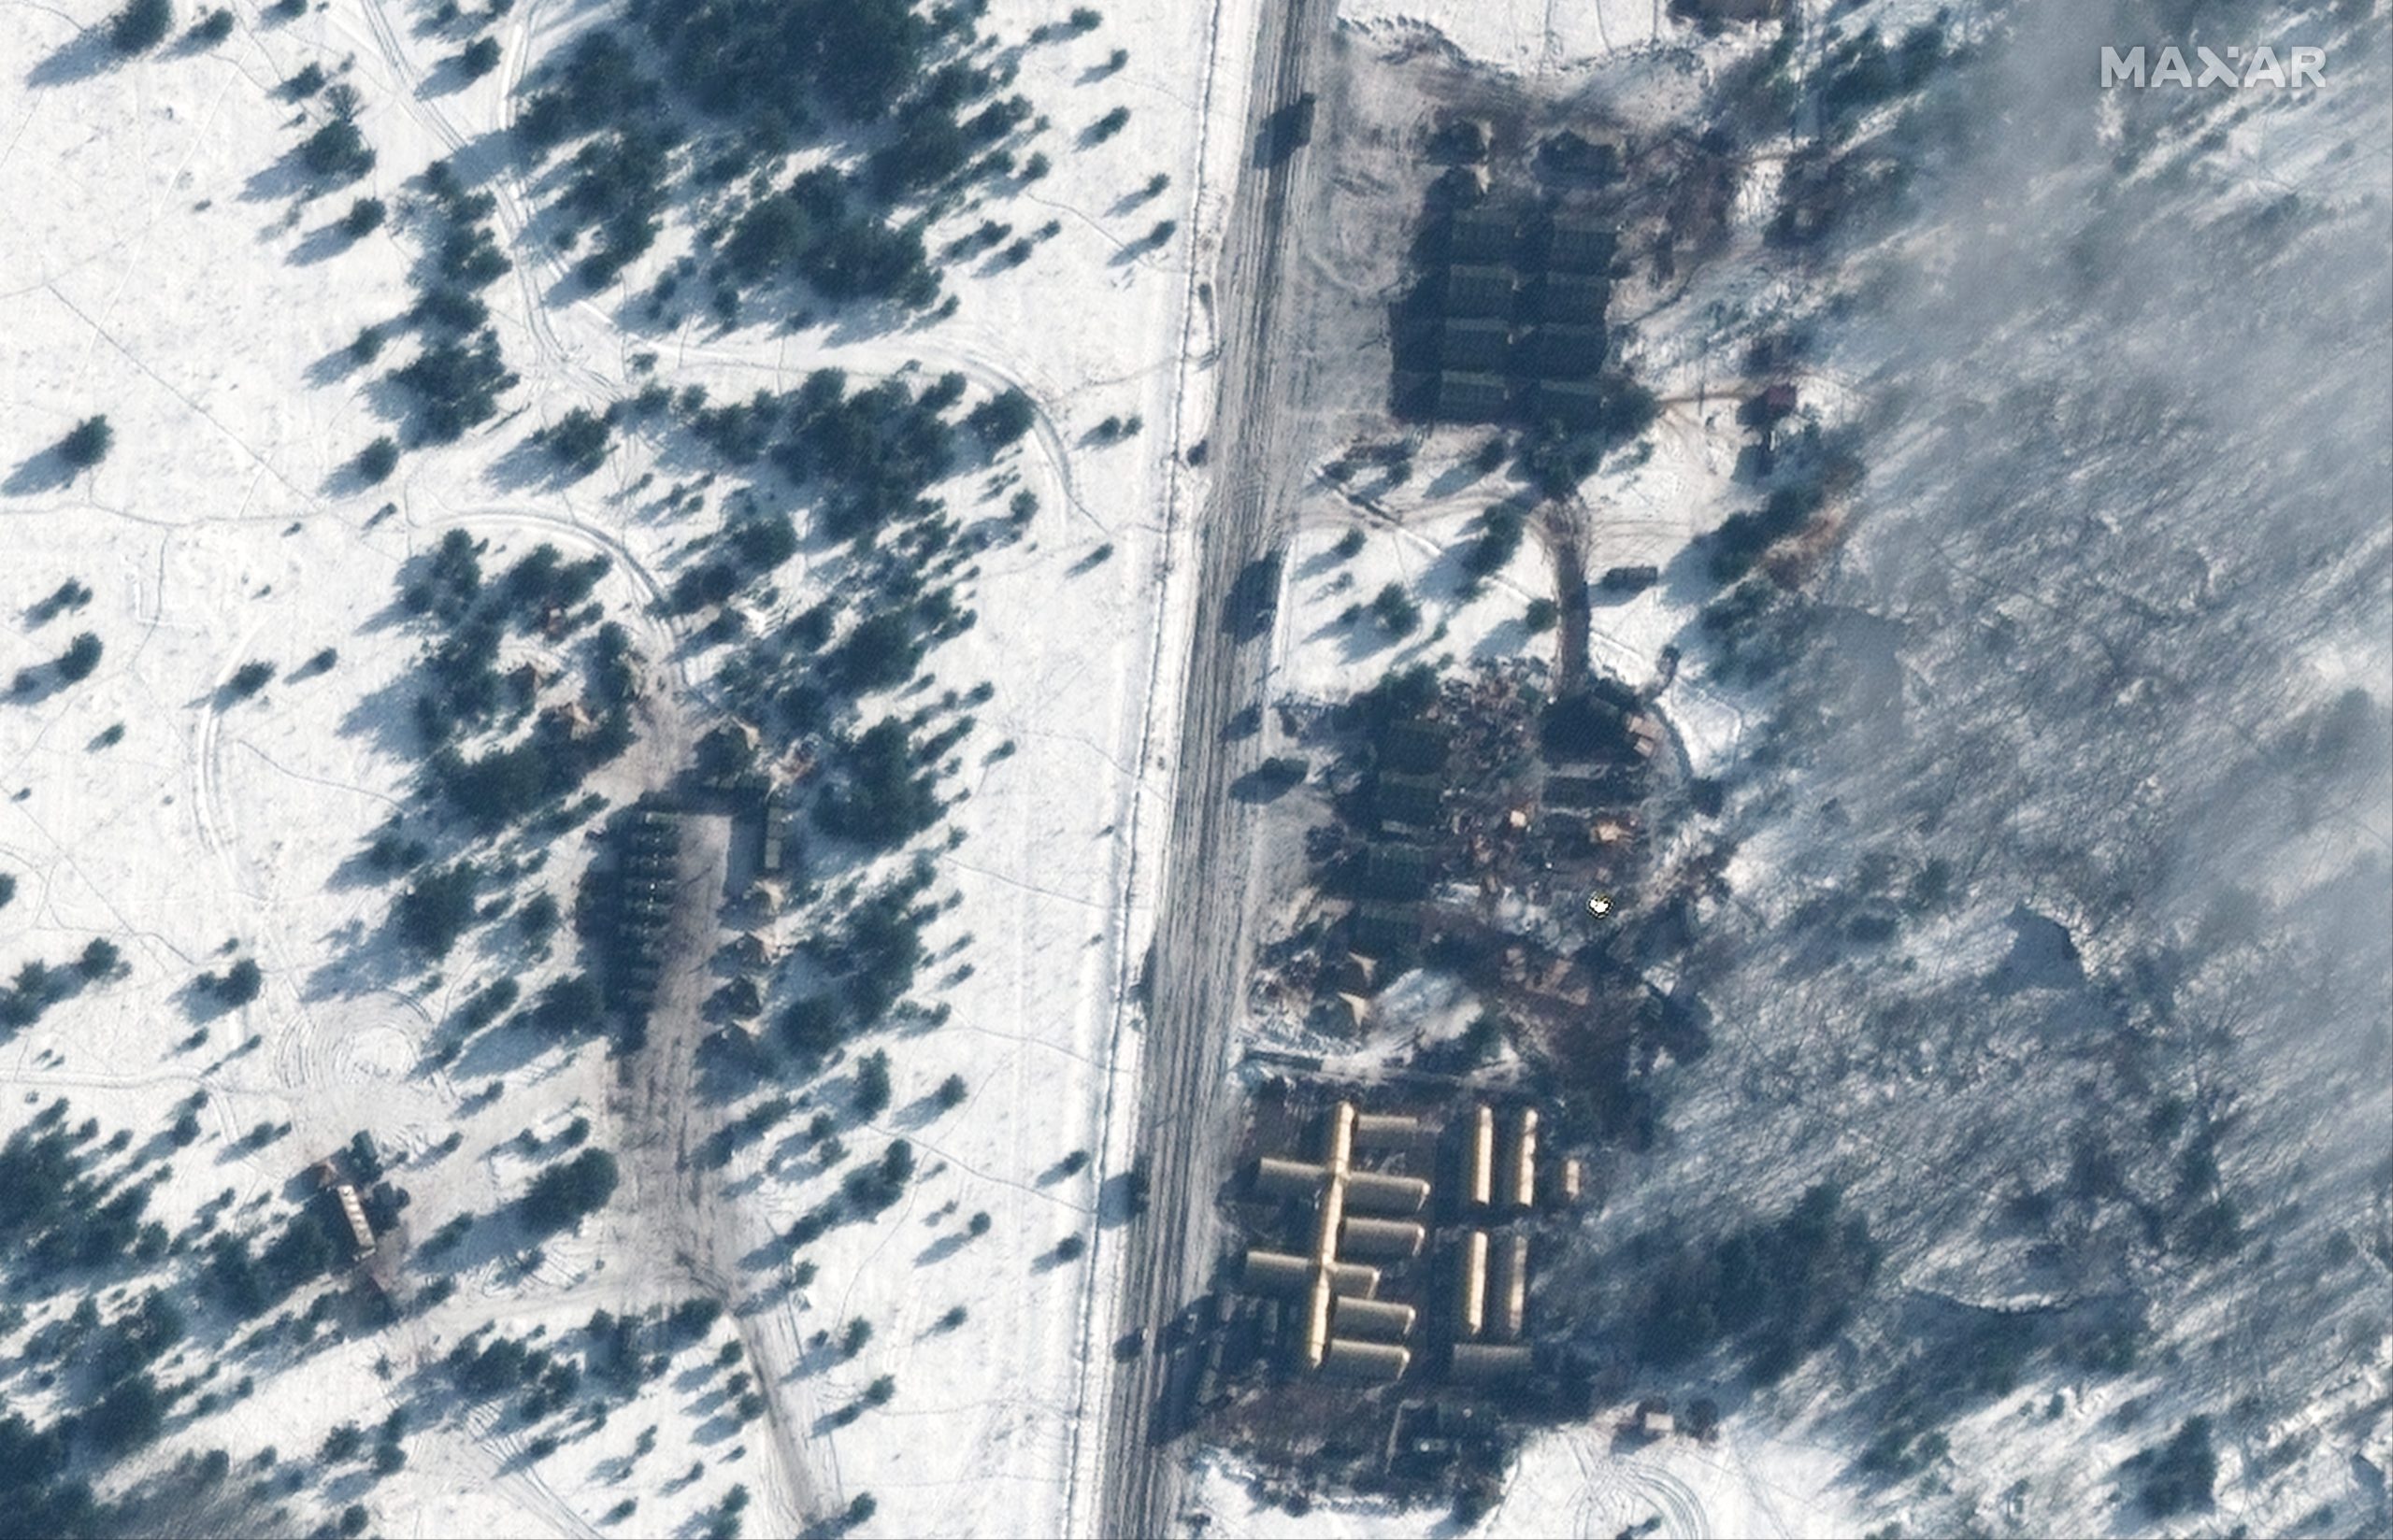 Satellite image of Russian field hospital in Belarus, several miles from the Ukrainian border.